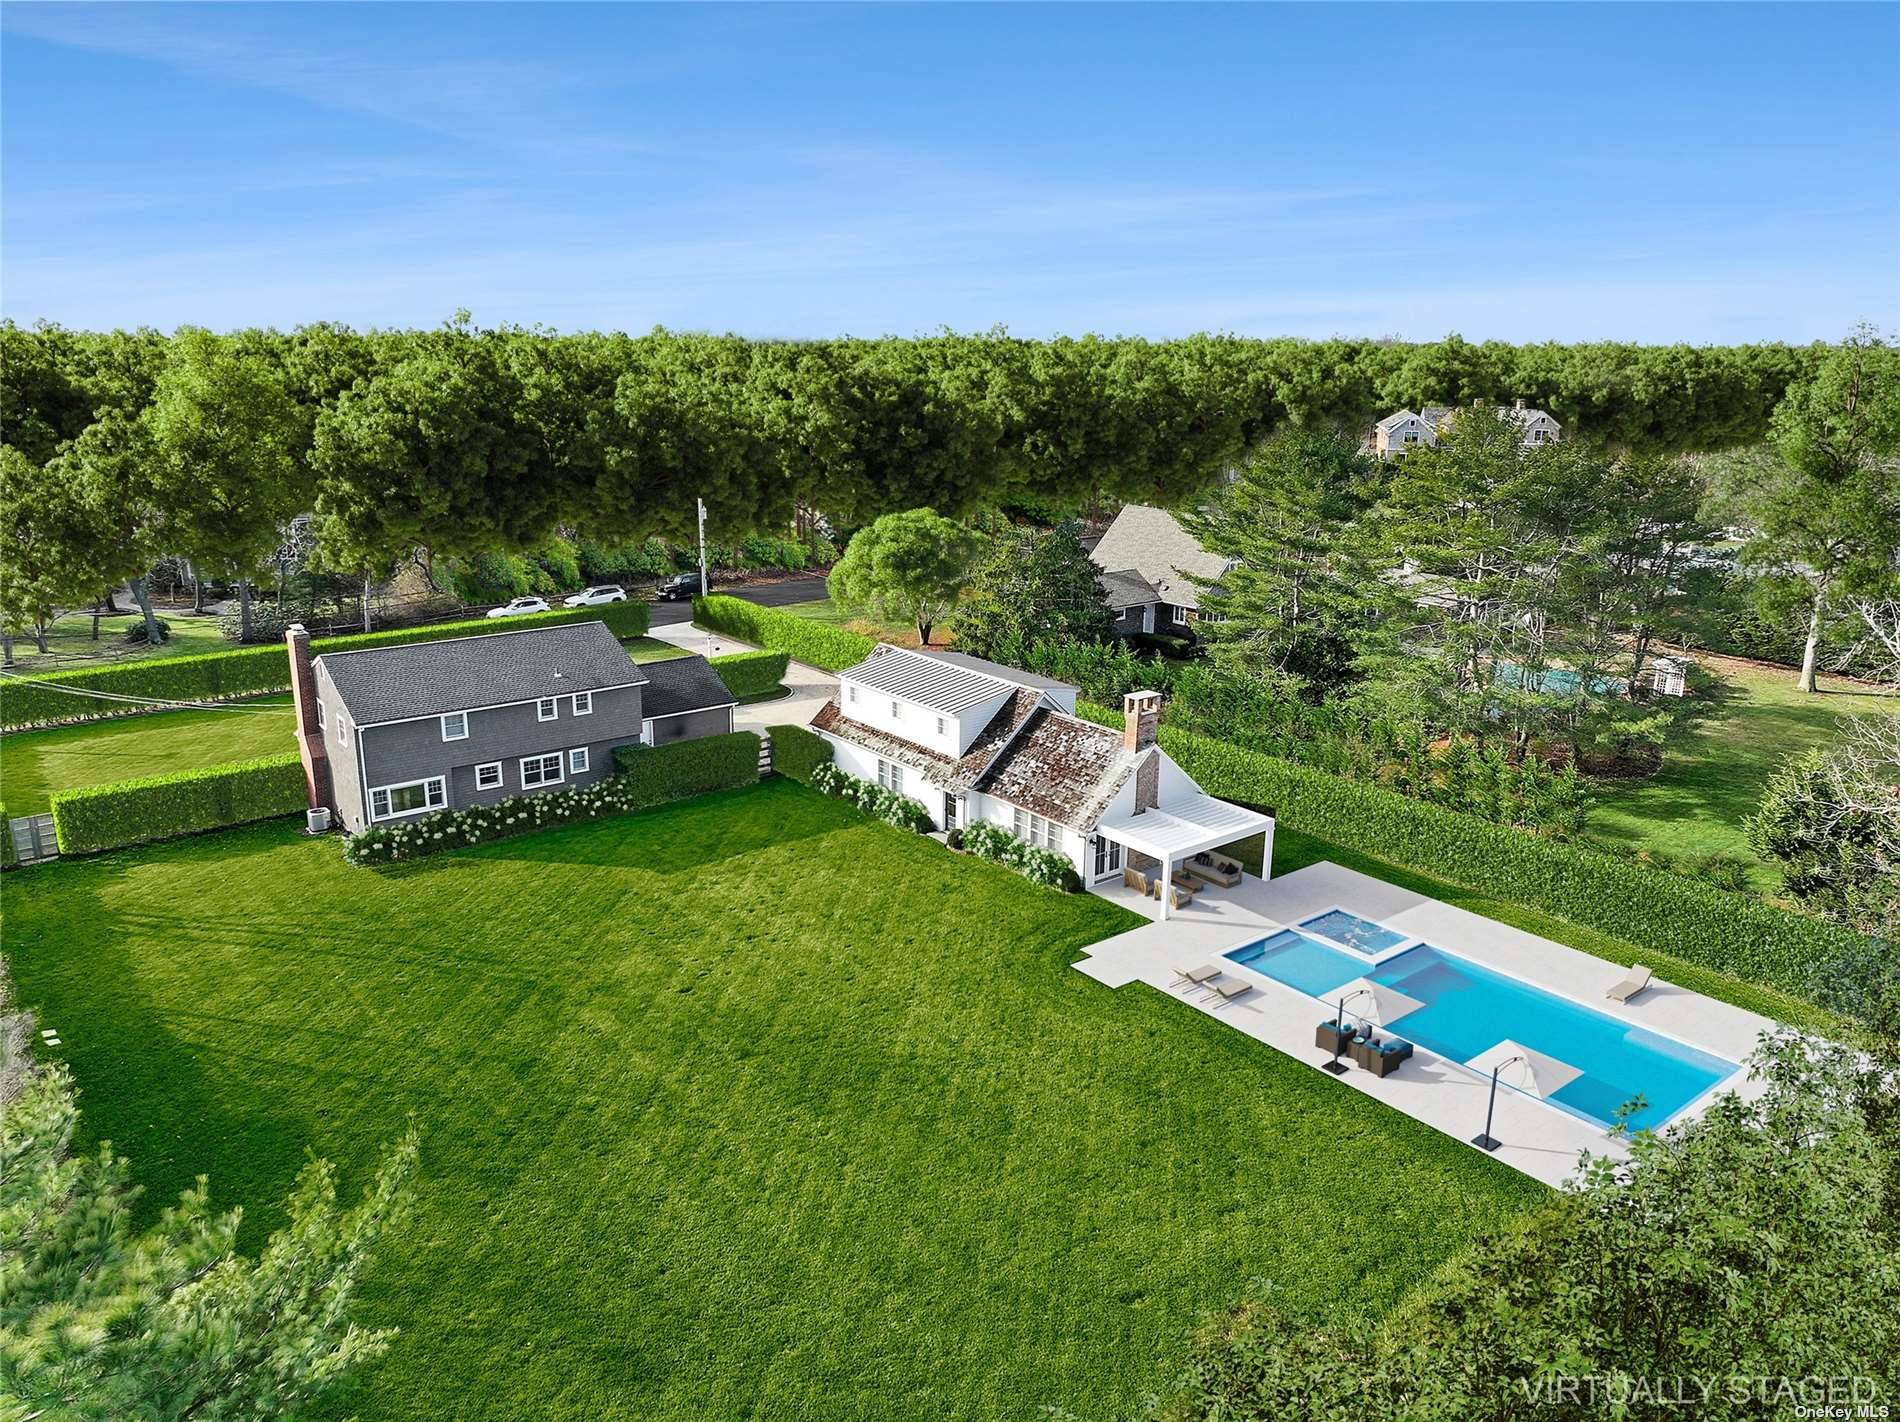 Located down a quiet cul de sac lane in the bucolic hamlet of Remsenburg, this classic Hamptons Farmhouse stands tall on a privately hedged acre, fully fenced and beautifully landscaped.